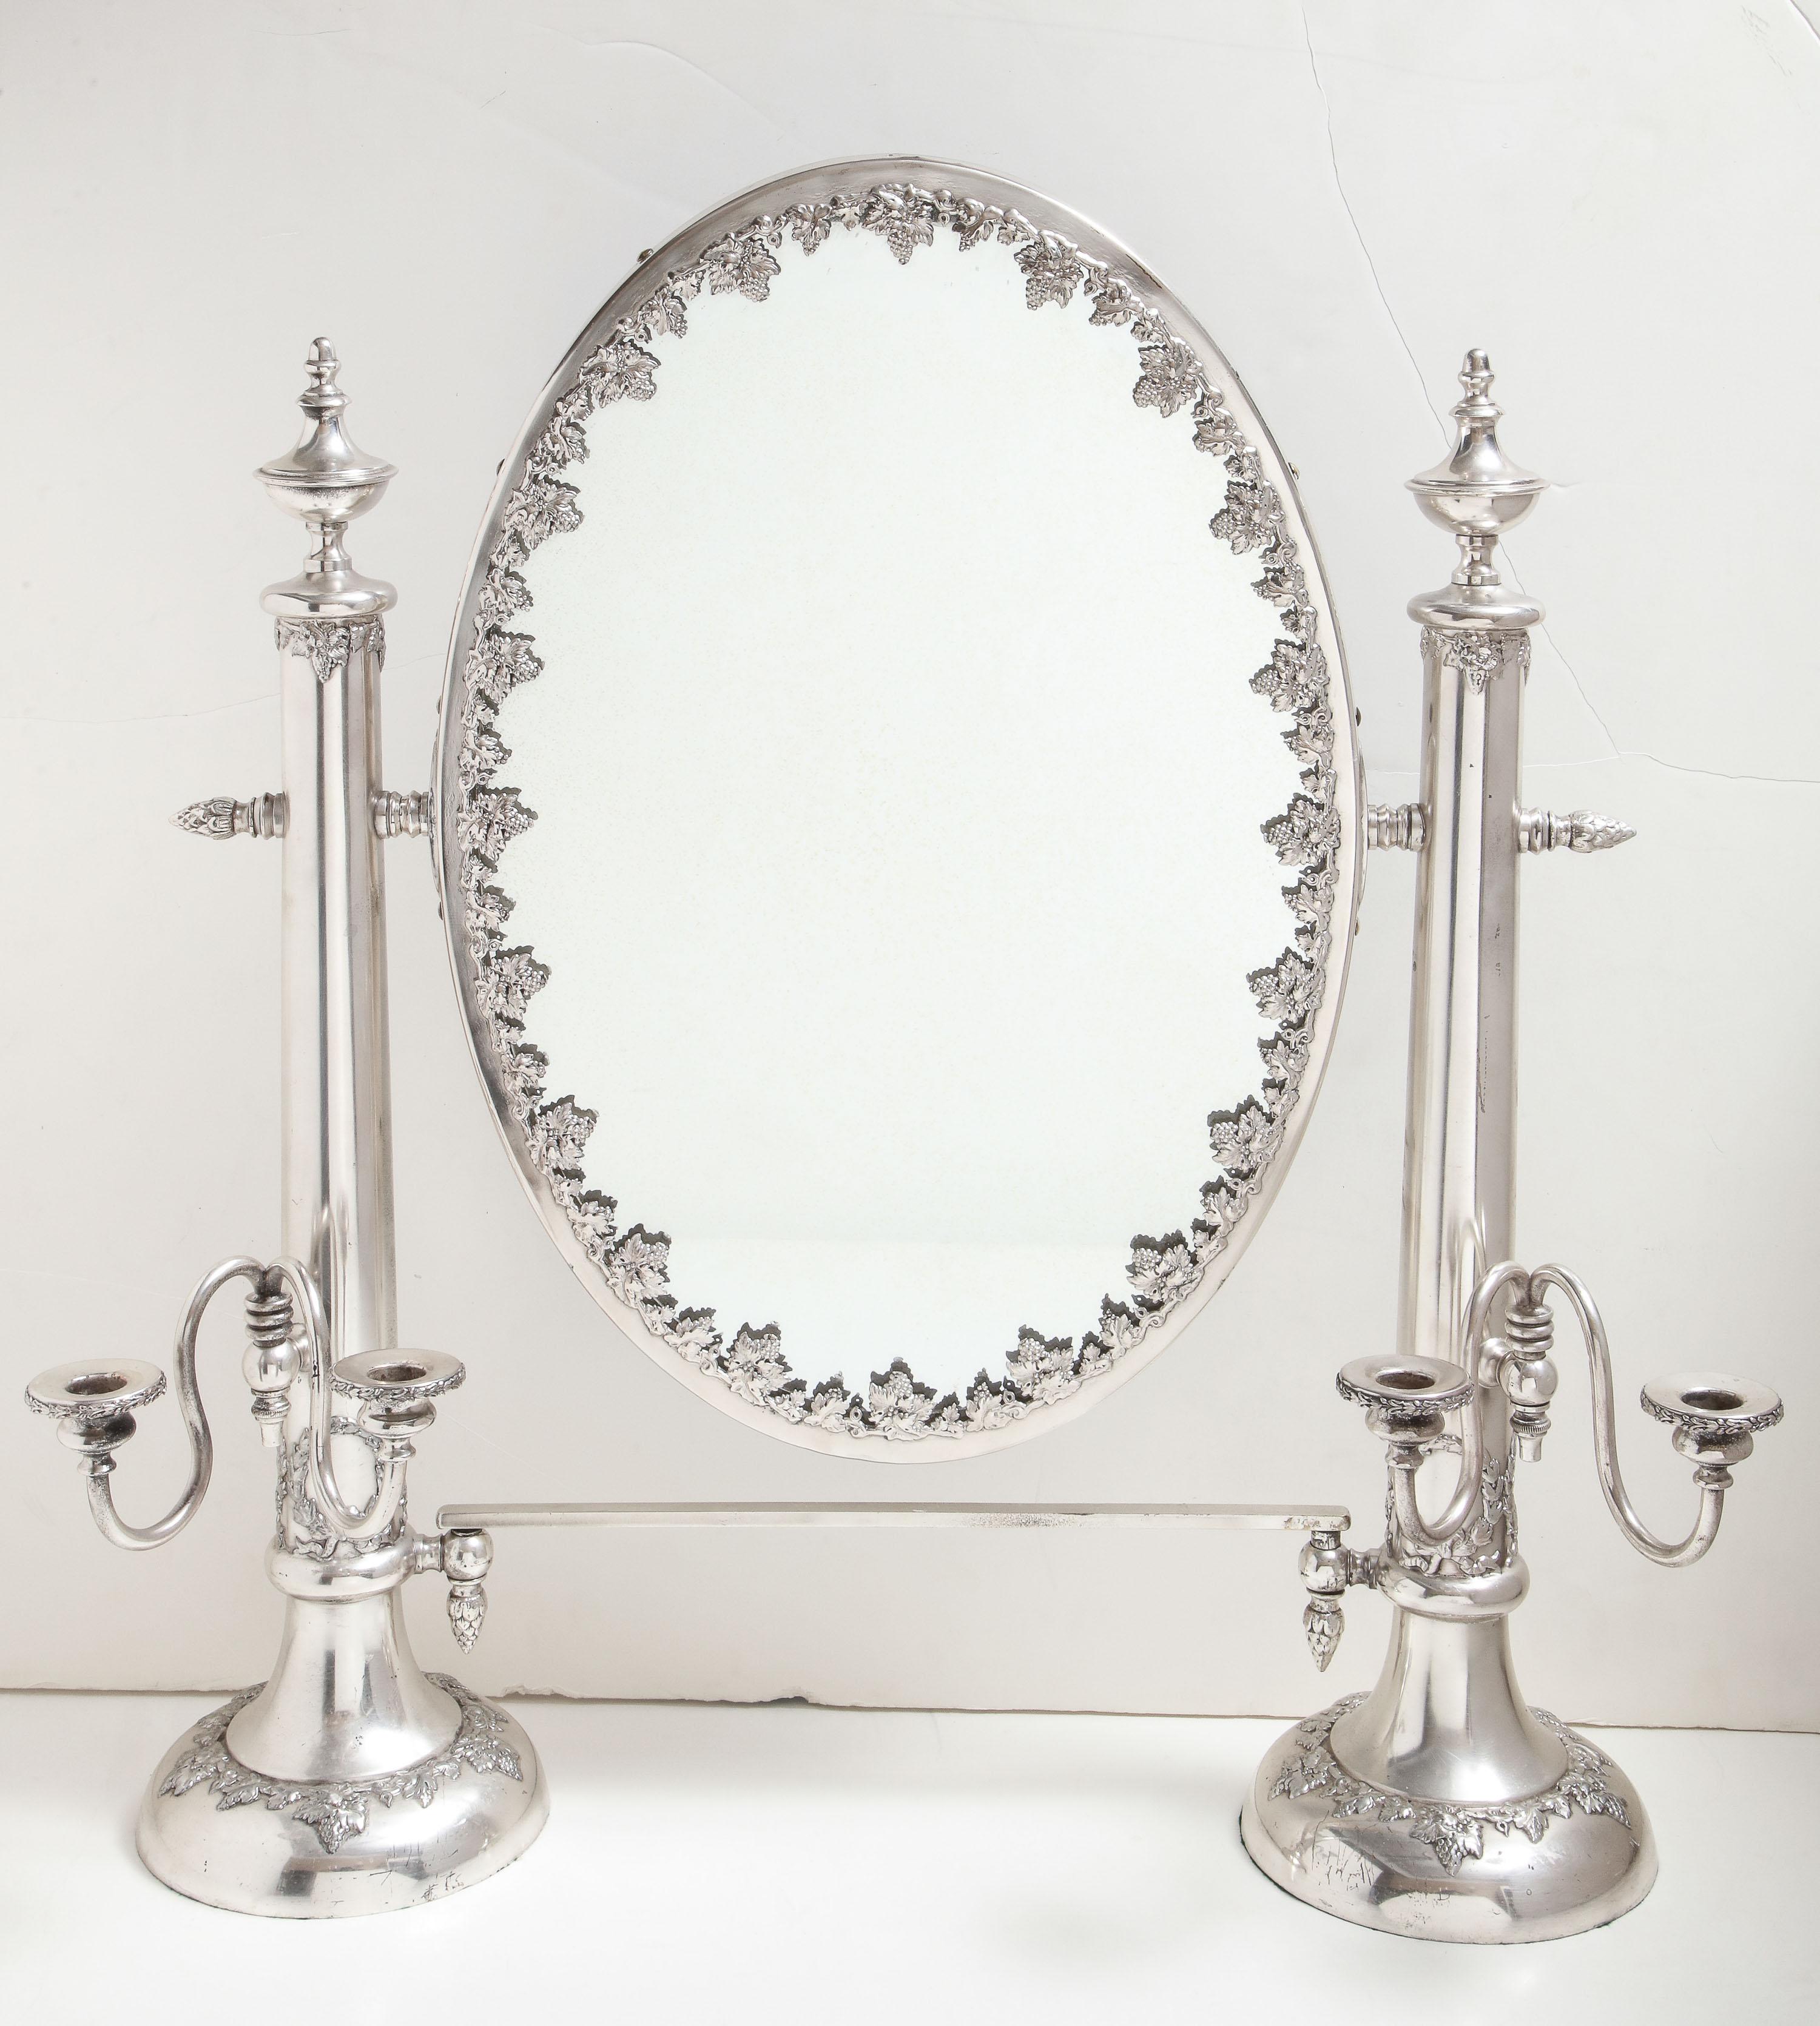 Very large, Victorian, Sheffield silver plated table mirror, Lawrence B. Smith Co., Boston, circa 1895. Measures: 26 inches high (at highest point) x 25 inches wide (from candleholder to candleholder) x 6 1/2 inches deep. Mirror itself, which